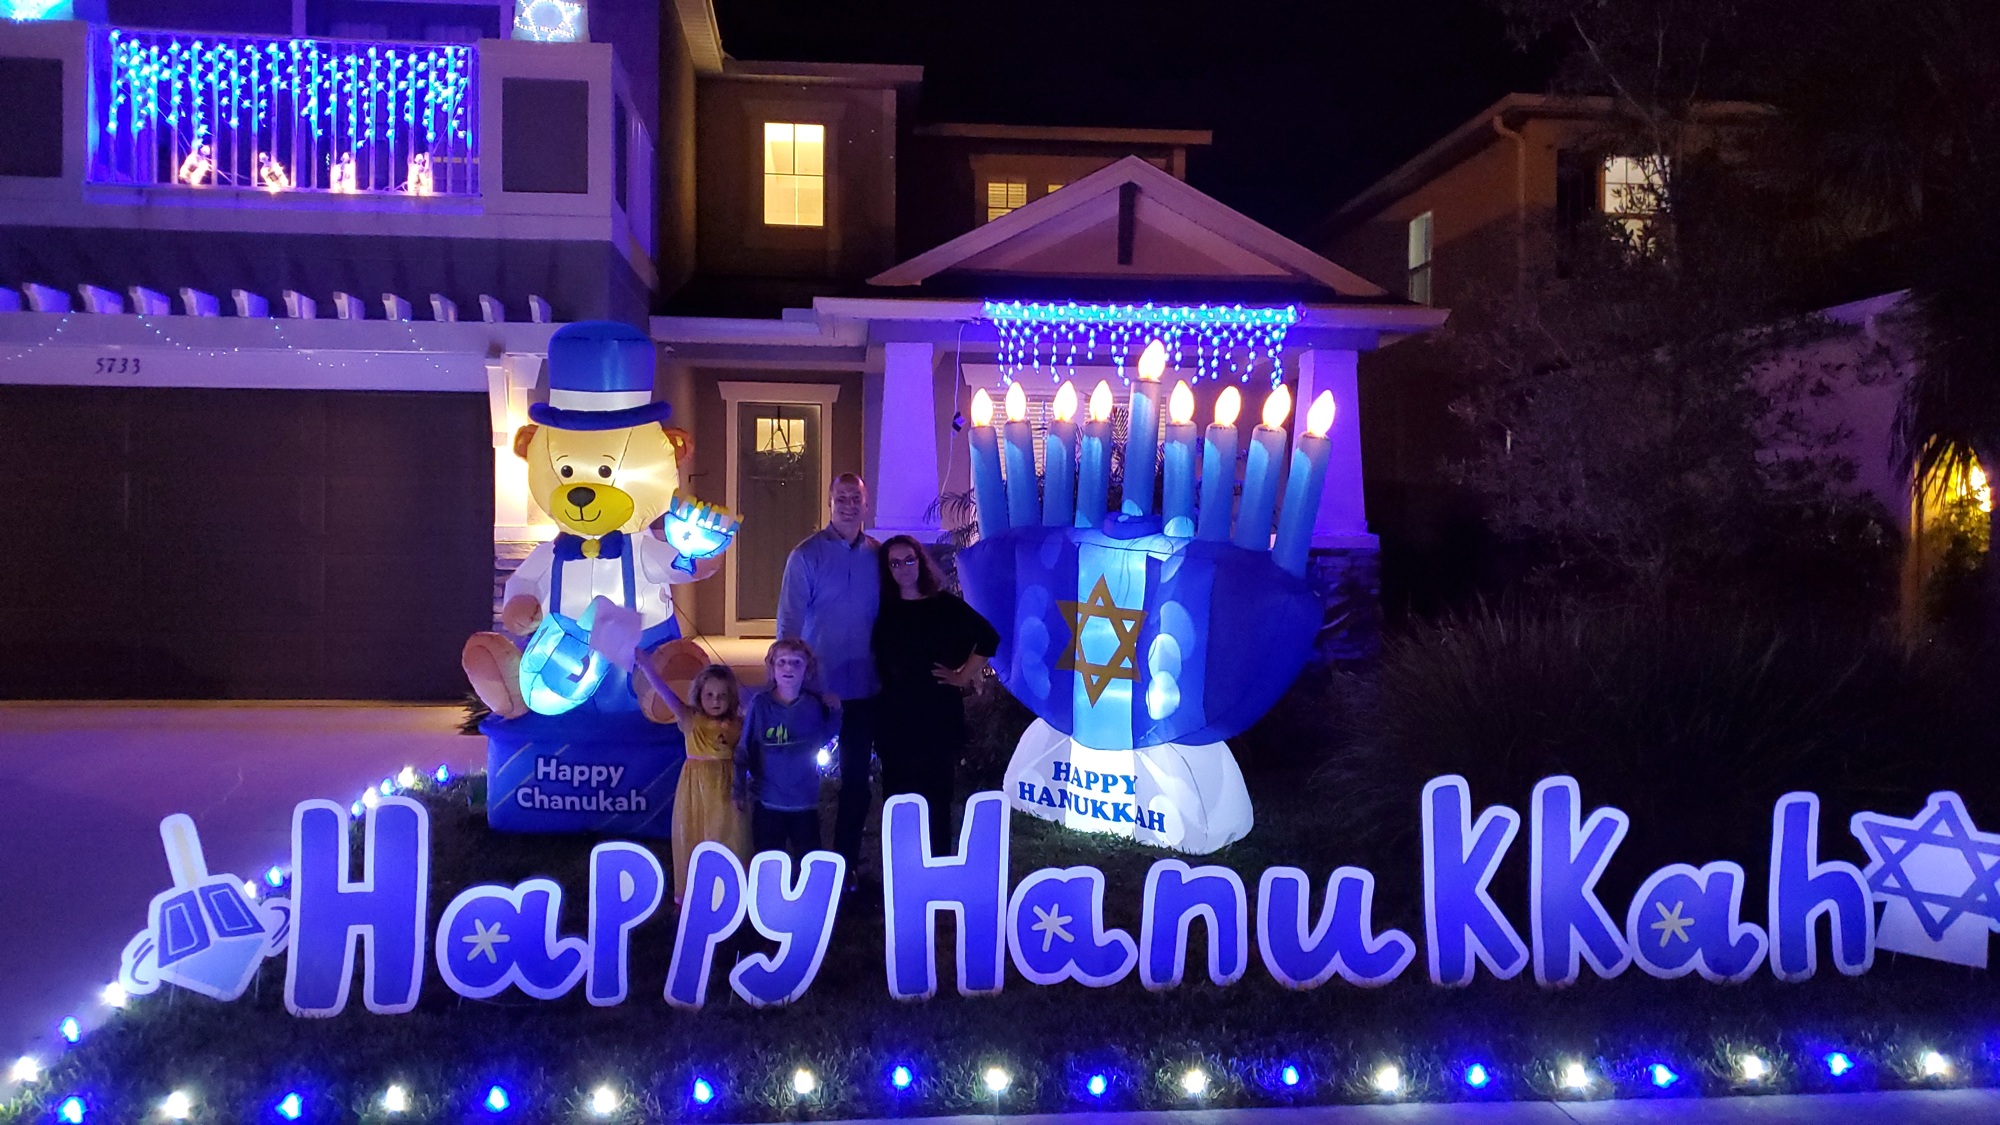 Rabbi Samantha Kahn and her family are celebrating the Festival of Lights with bright yard decorations.